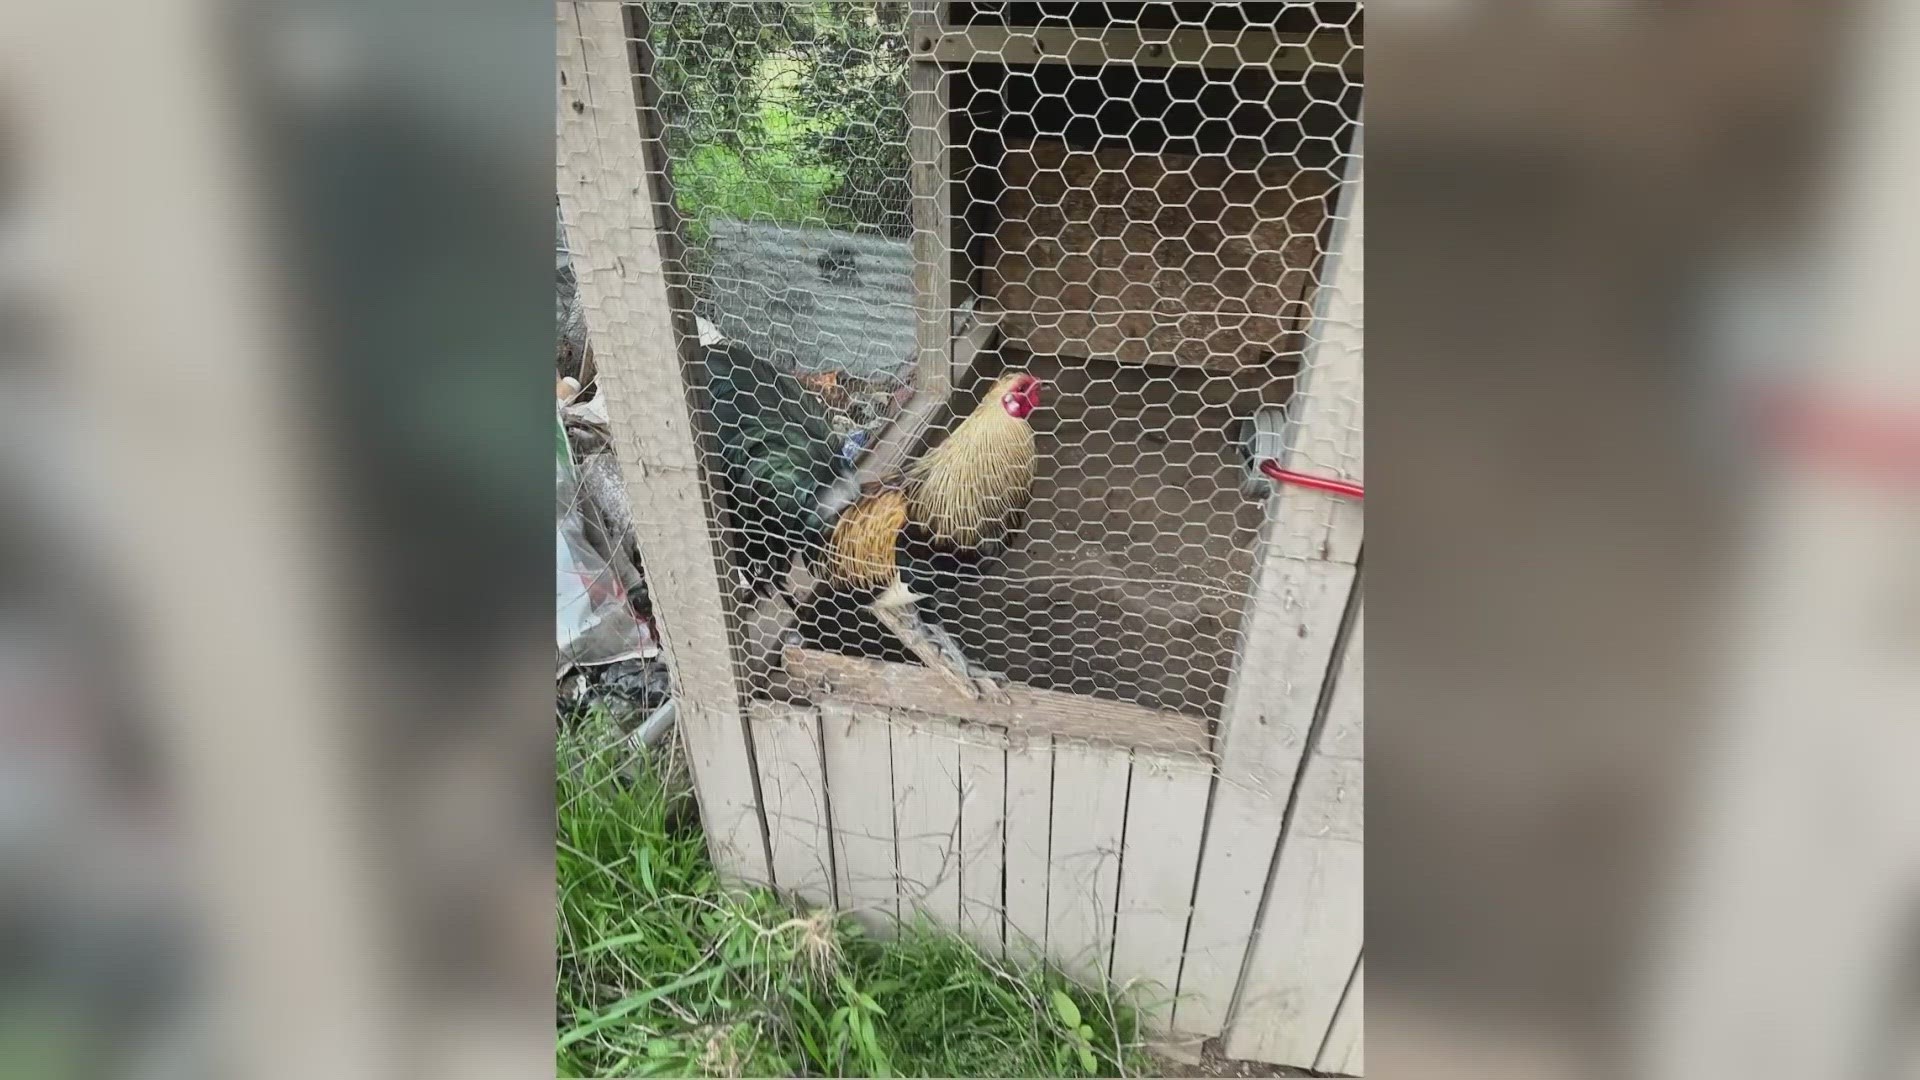 Police say they also seized paraphernalia related to cockfighting.